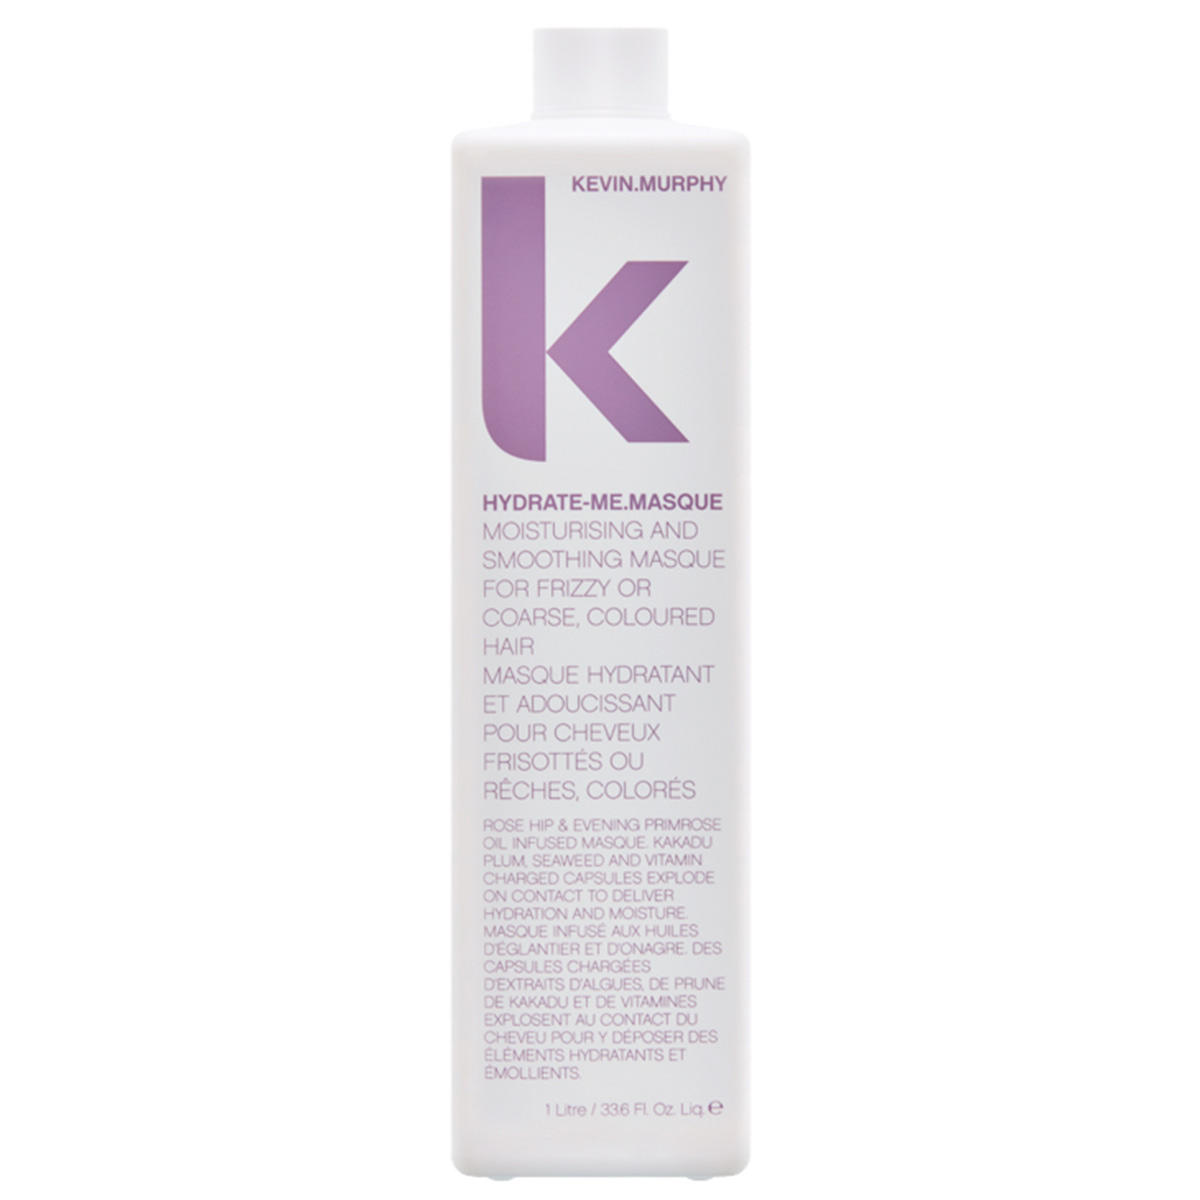 KEVIN.MURPHY HYDRATE-ME Masque 1 Liter